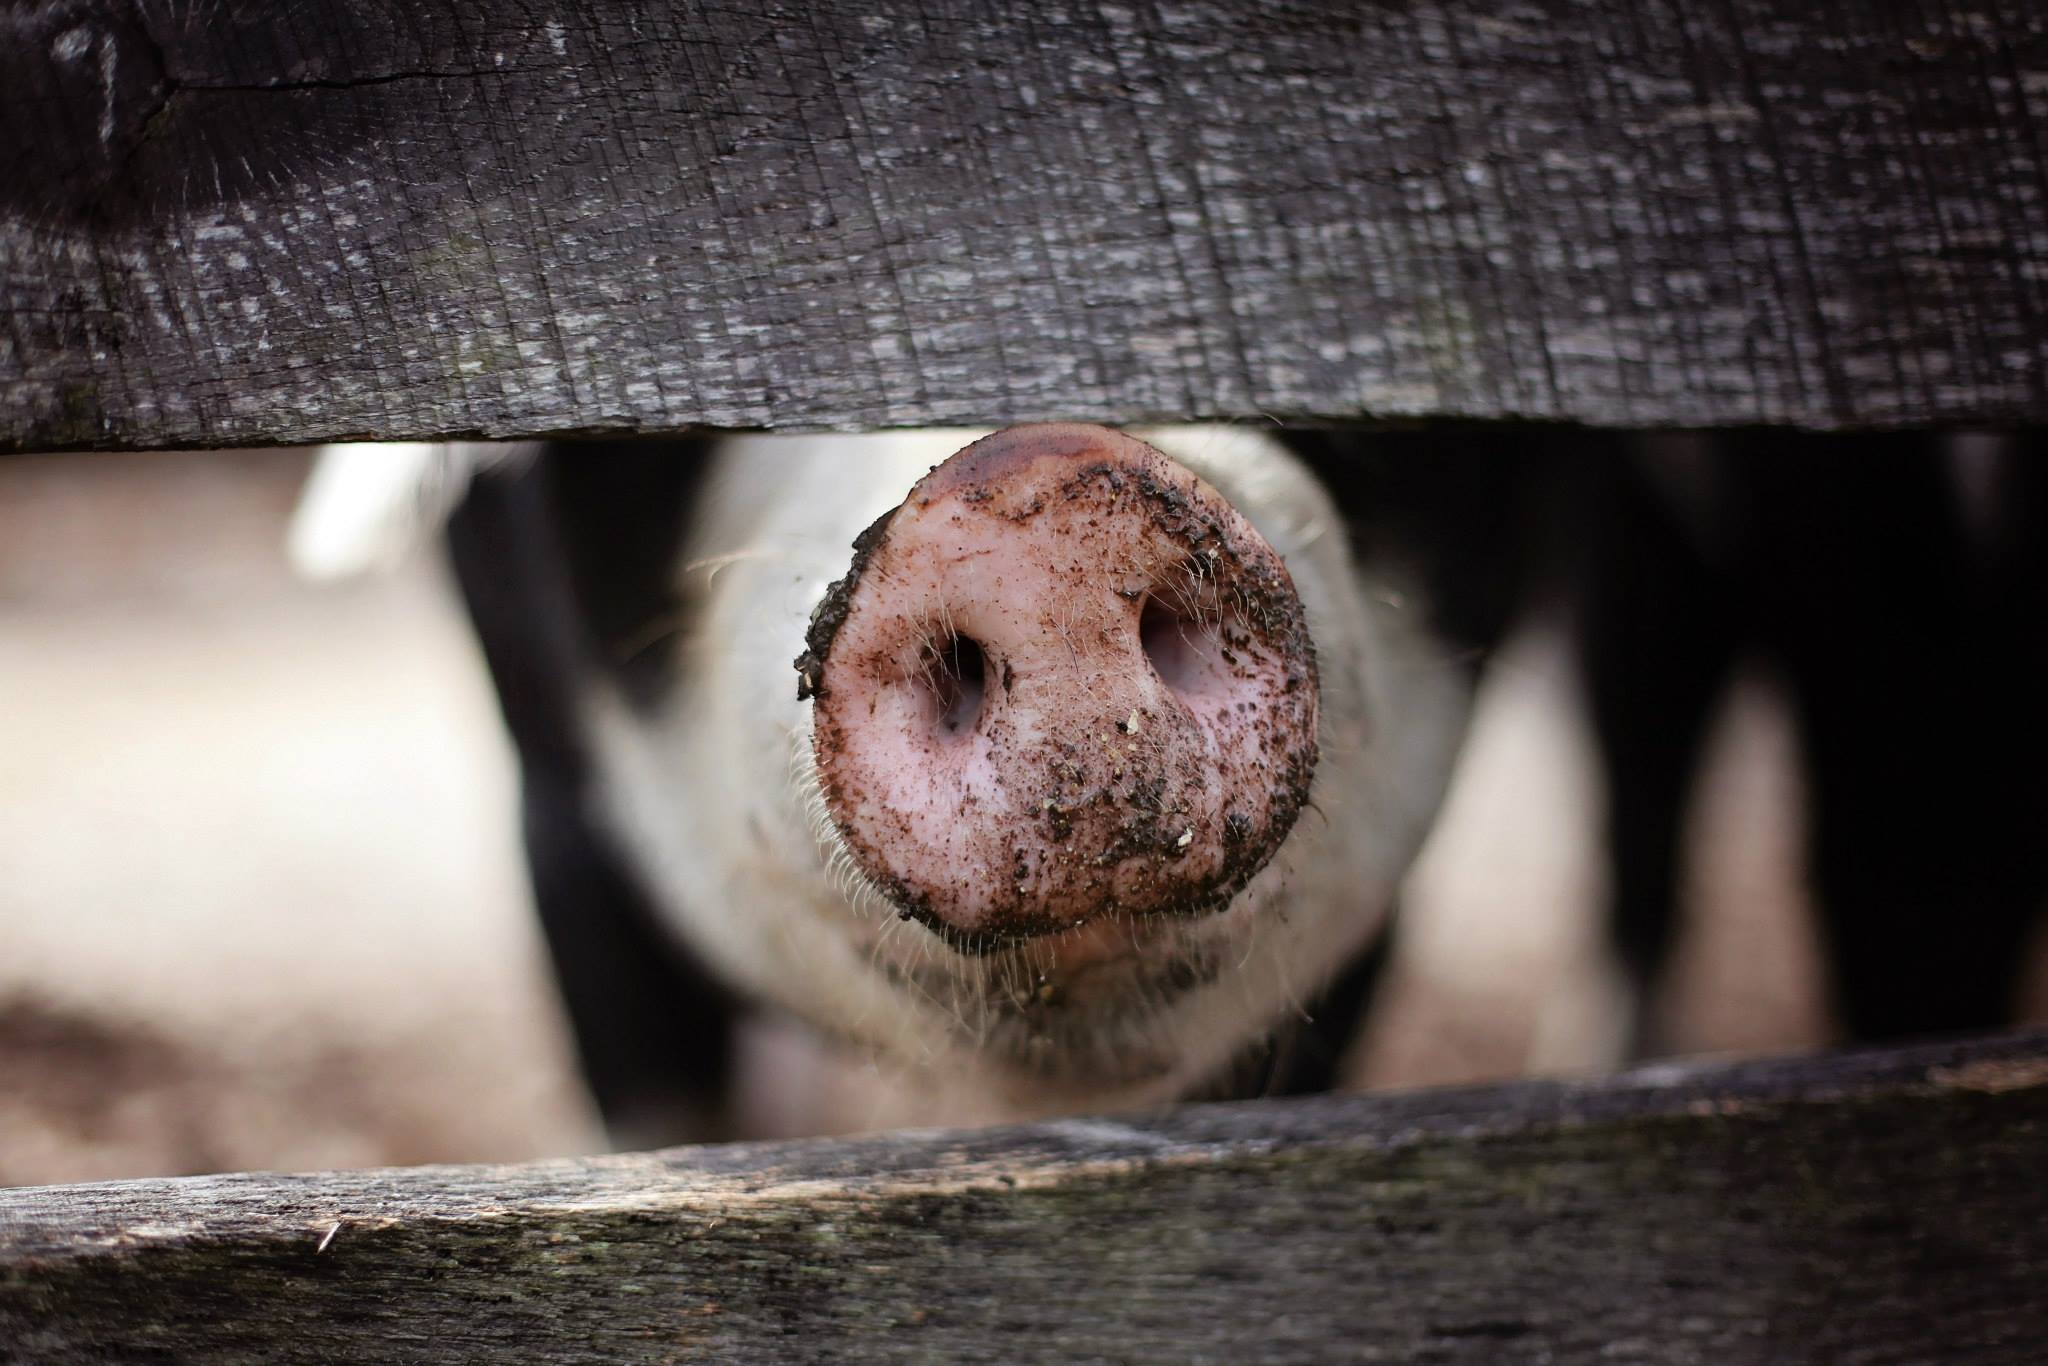 The OIE's standards aim to improve the welfare of farm animals